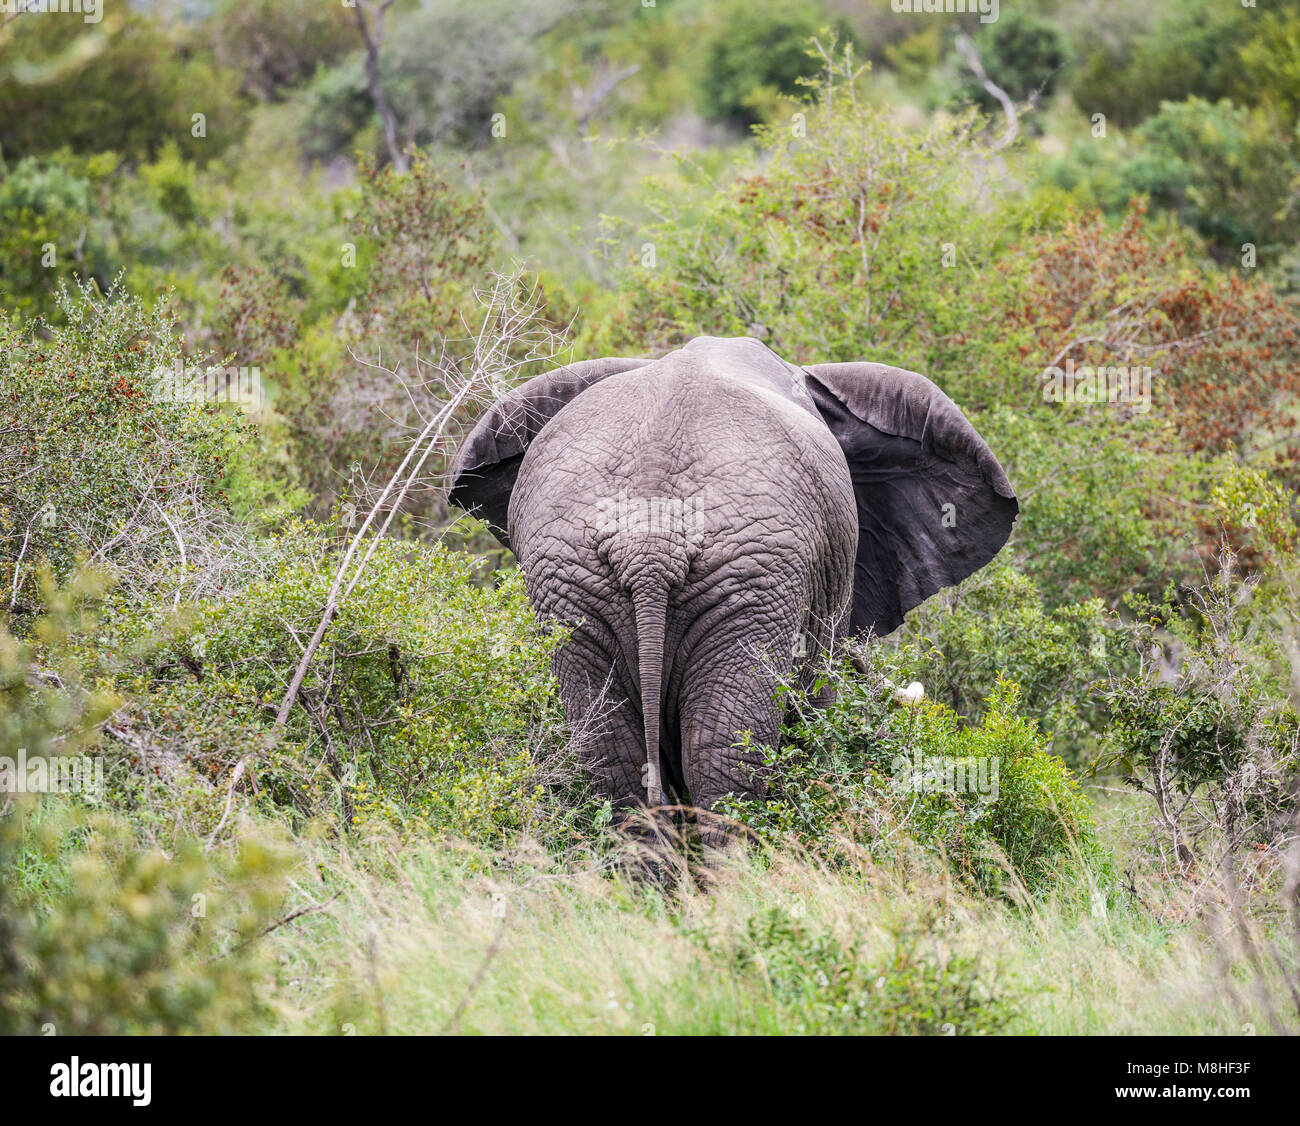 The rear end and tail of an African Elephant, Loxodonta africana, in Kruger NP, South Africa Stock Photo